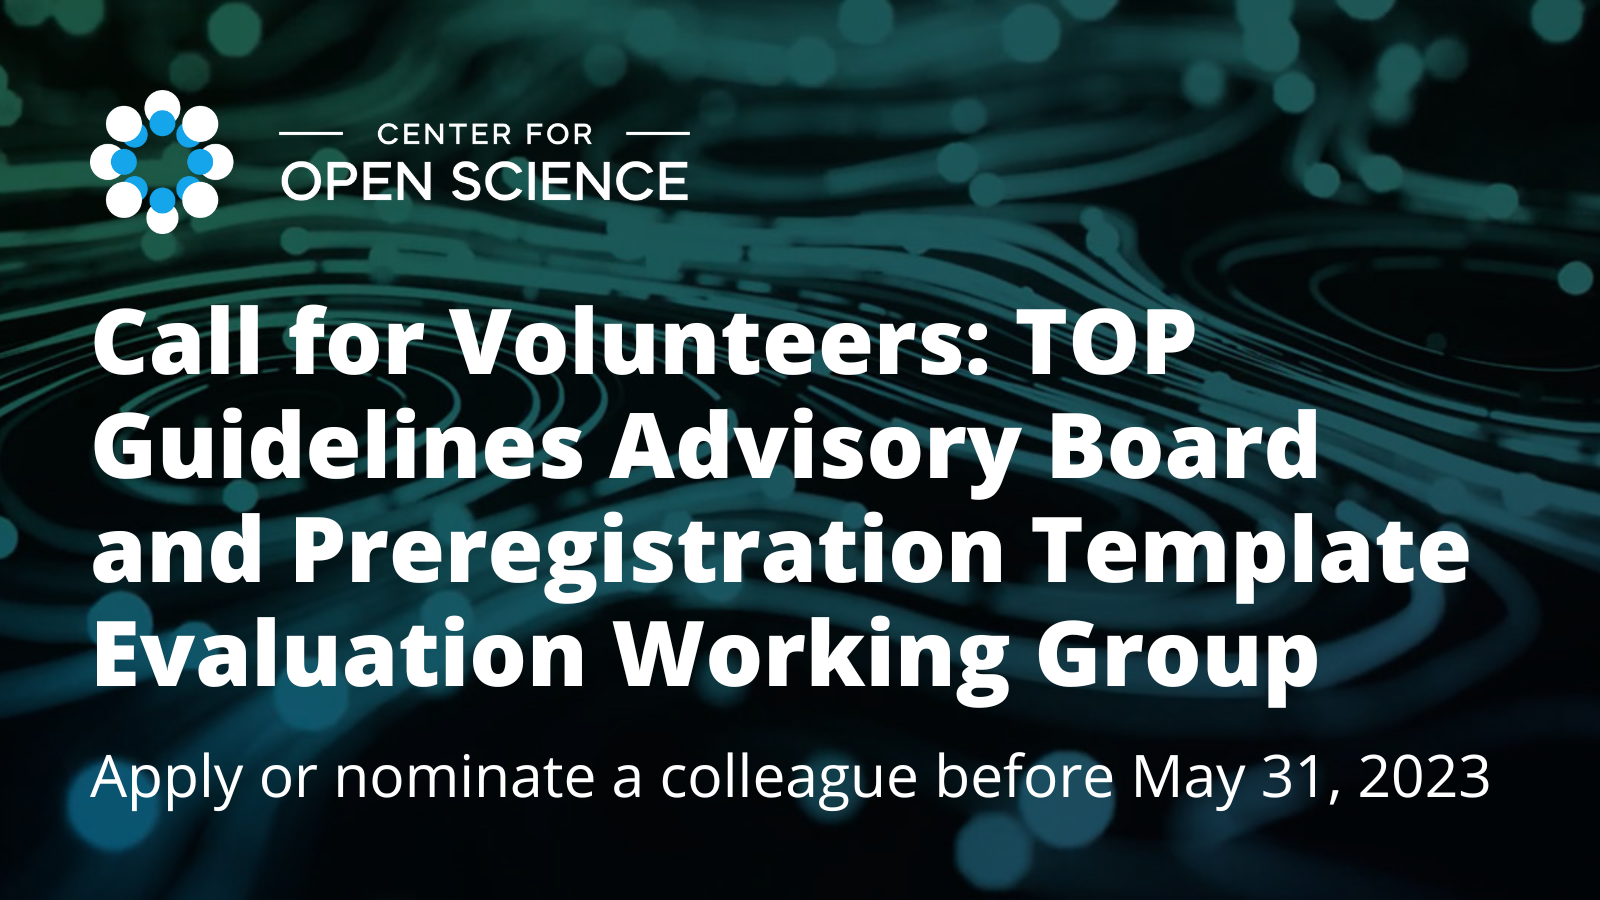 Text: Call for Volunteers: TOP Guidelines Advisory Board and Preregistration Template Evaluation Working Group